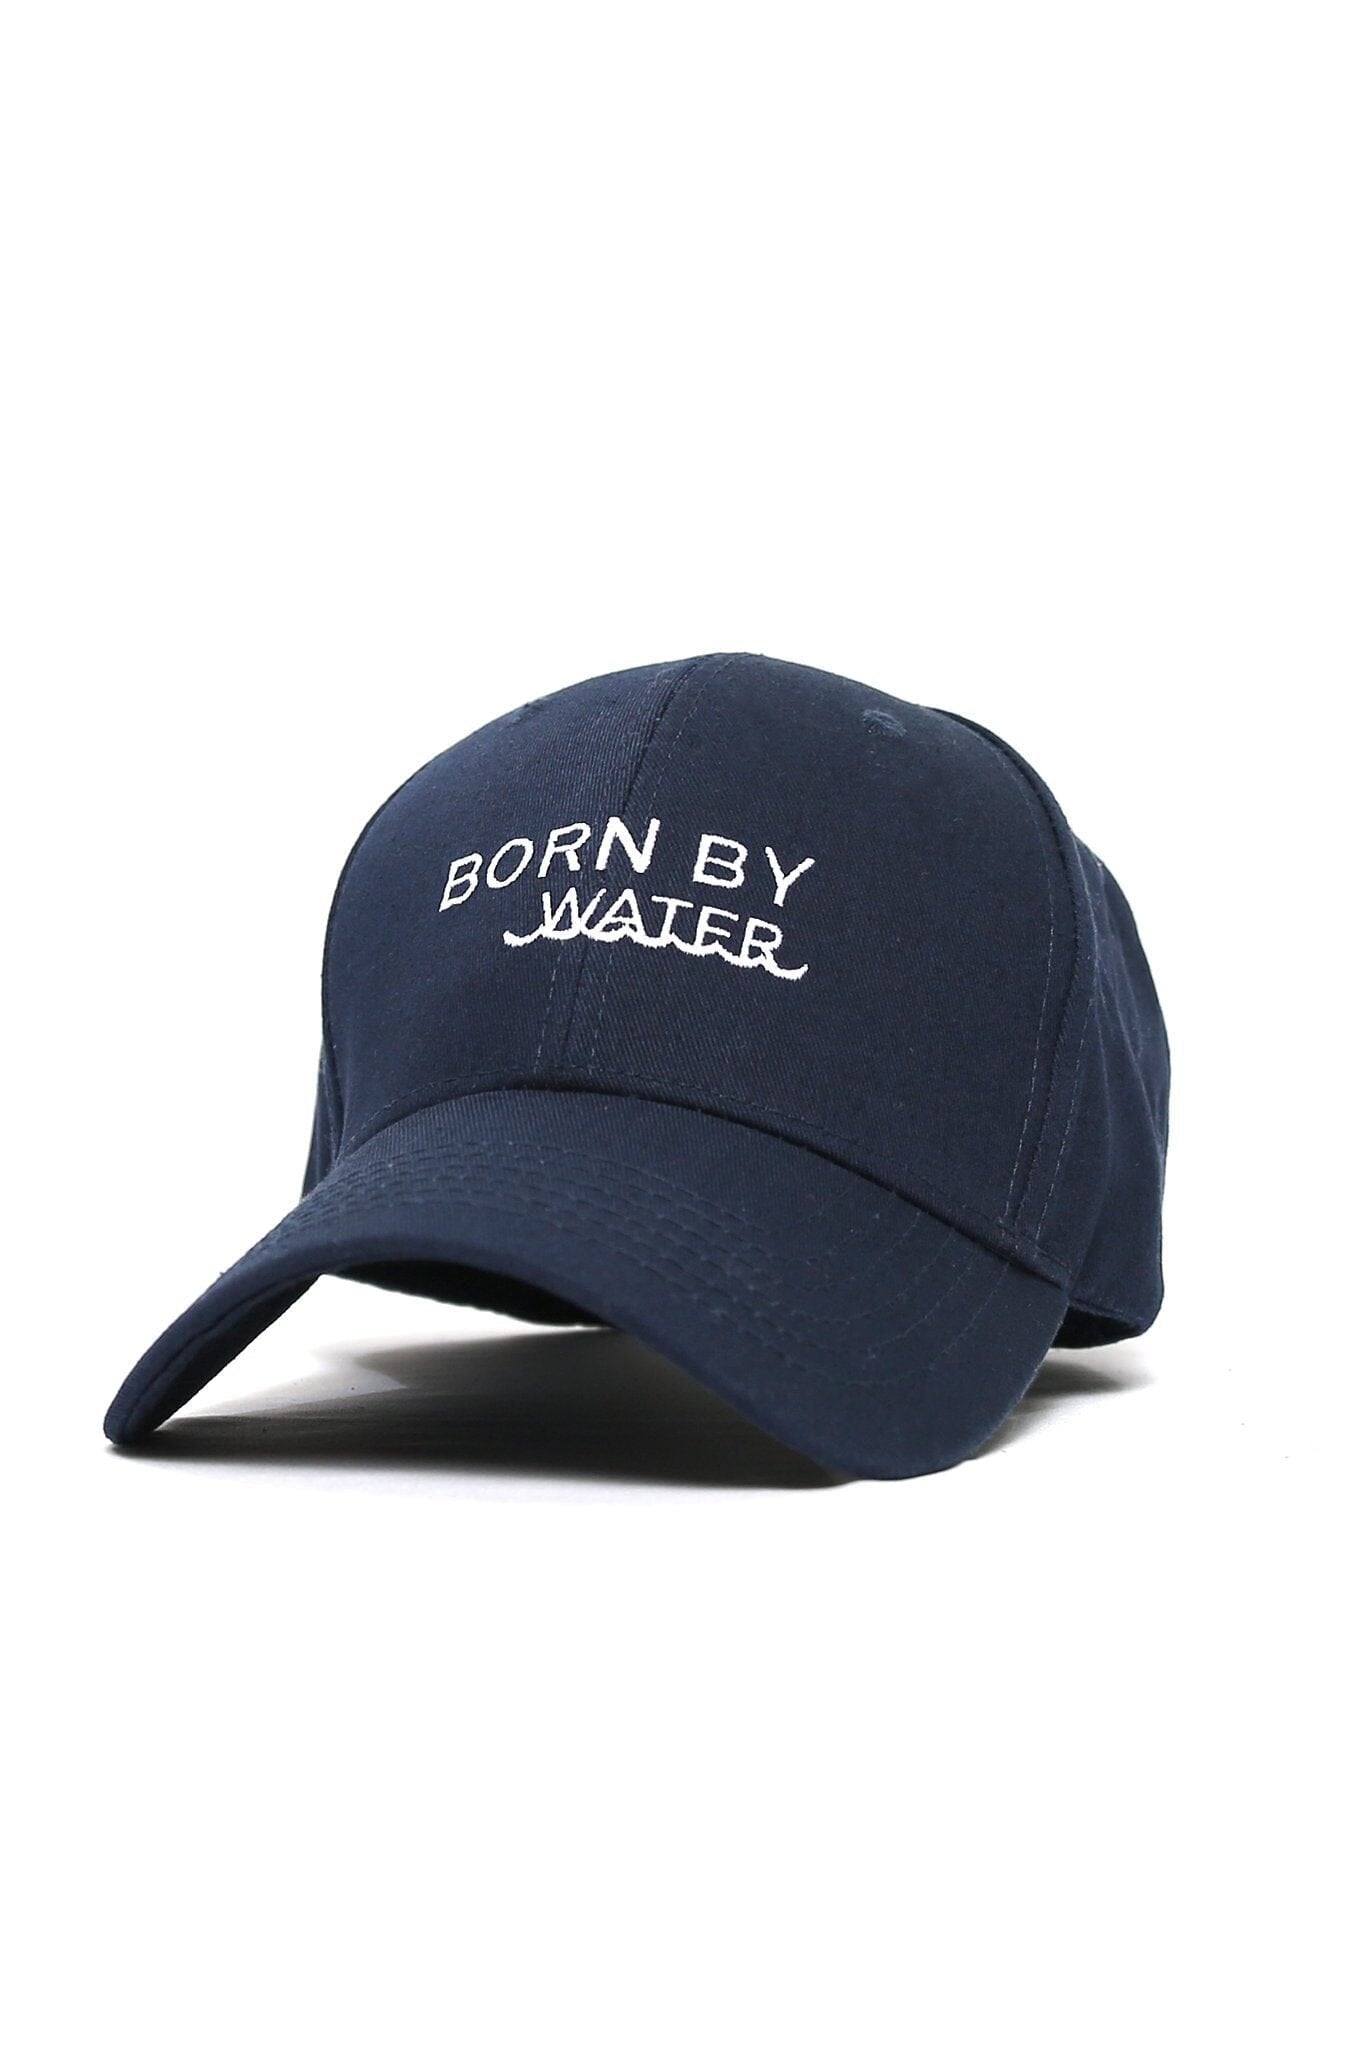 BORN BY WATER WAVES CAP - BL-NAVY - OS